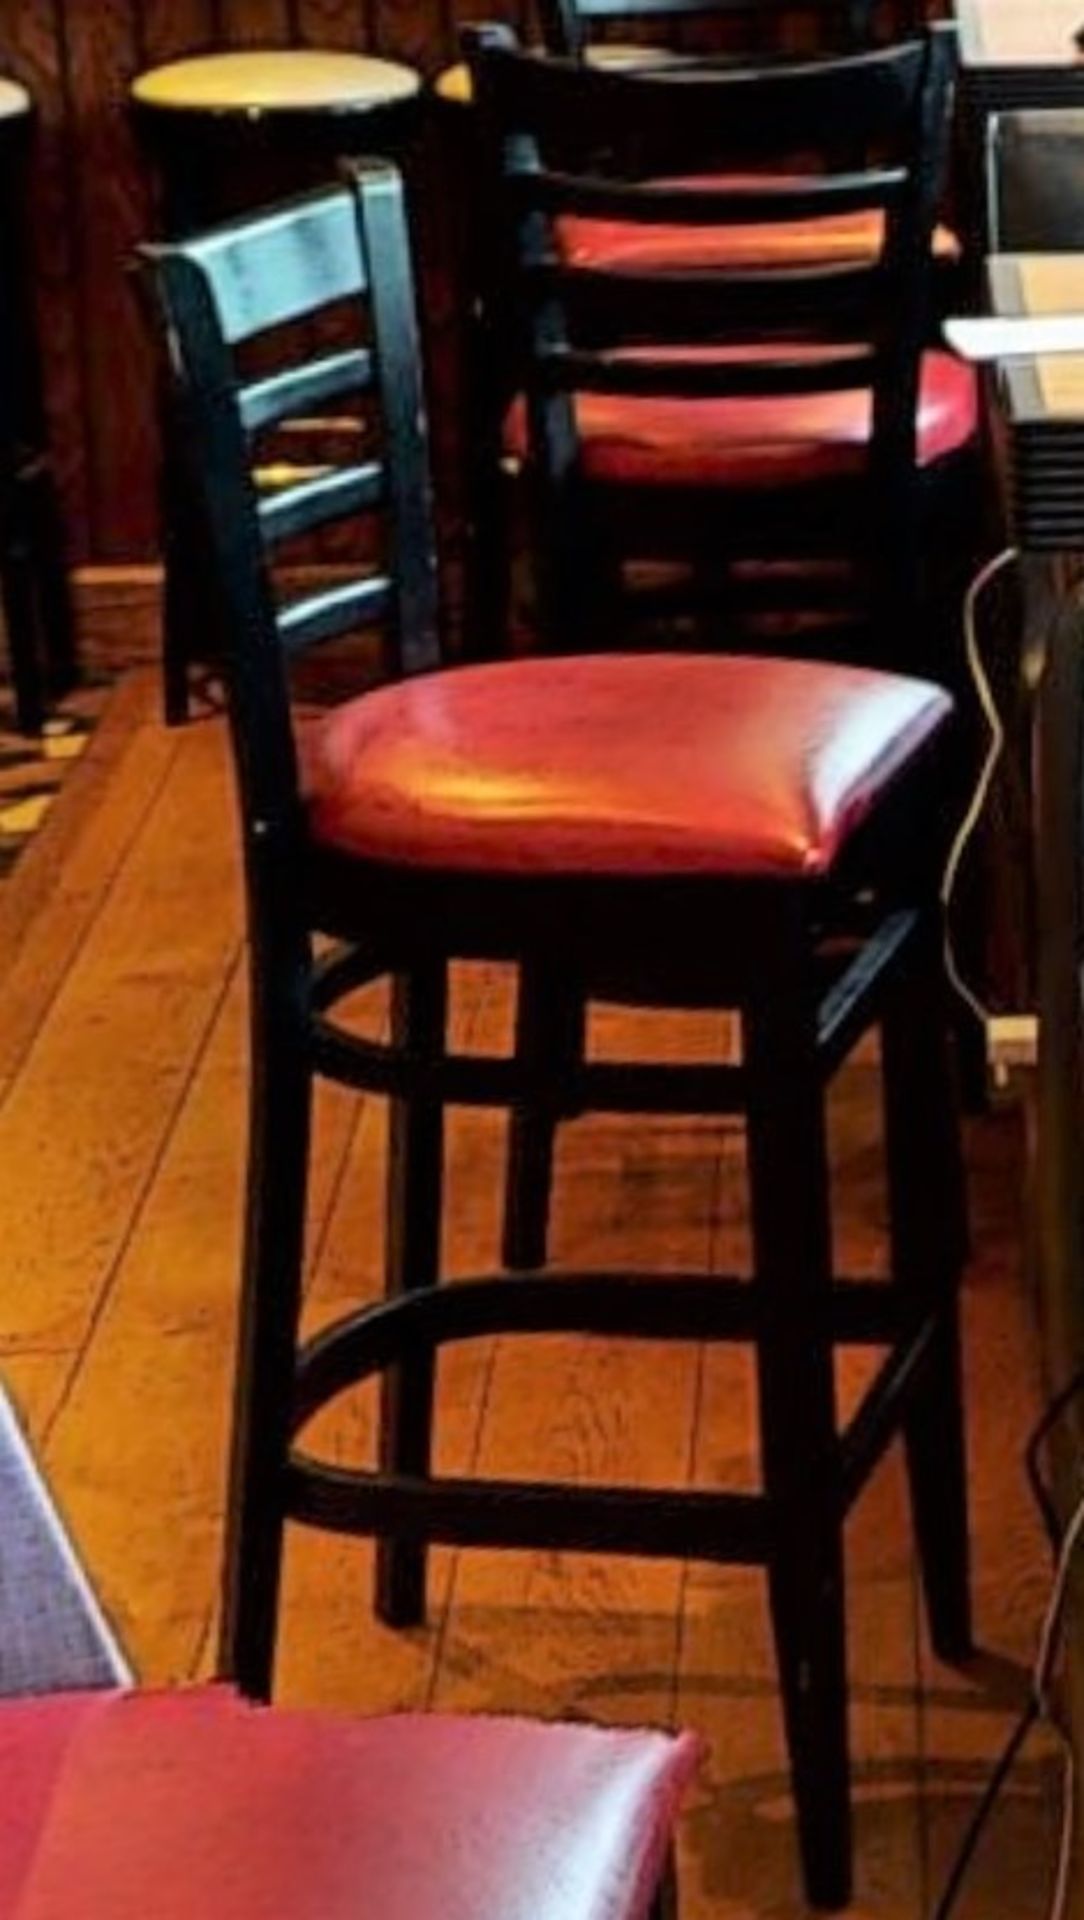 6 x Restaurant Bar Stools - Black Finish With Various Coloured Seat Pads